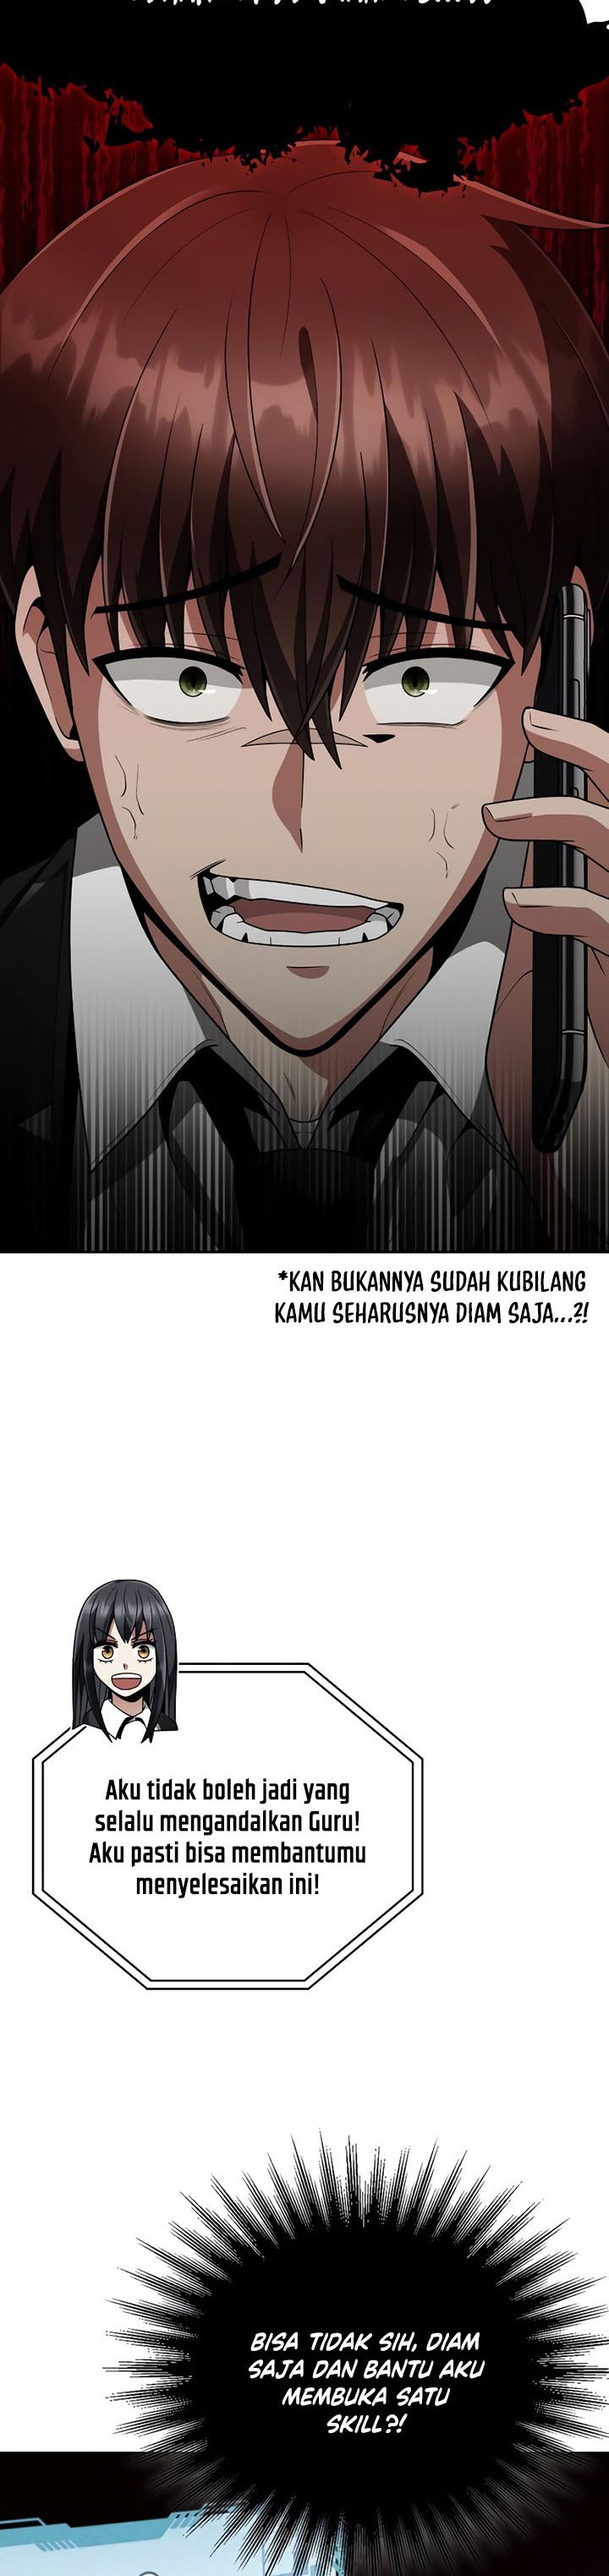 Dilarang COPAS - situs resmi www.mangacanblog.com - Komik clever cleaning life of the returned genius hunter 020 - chapter 20 21 Indonesia clever cleaning life of the returned genius hunter 020 - chapter 20 Terbaru 38|Baca Manga Komik Indonesia|Mangacan